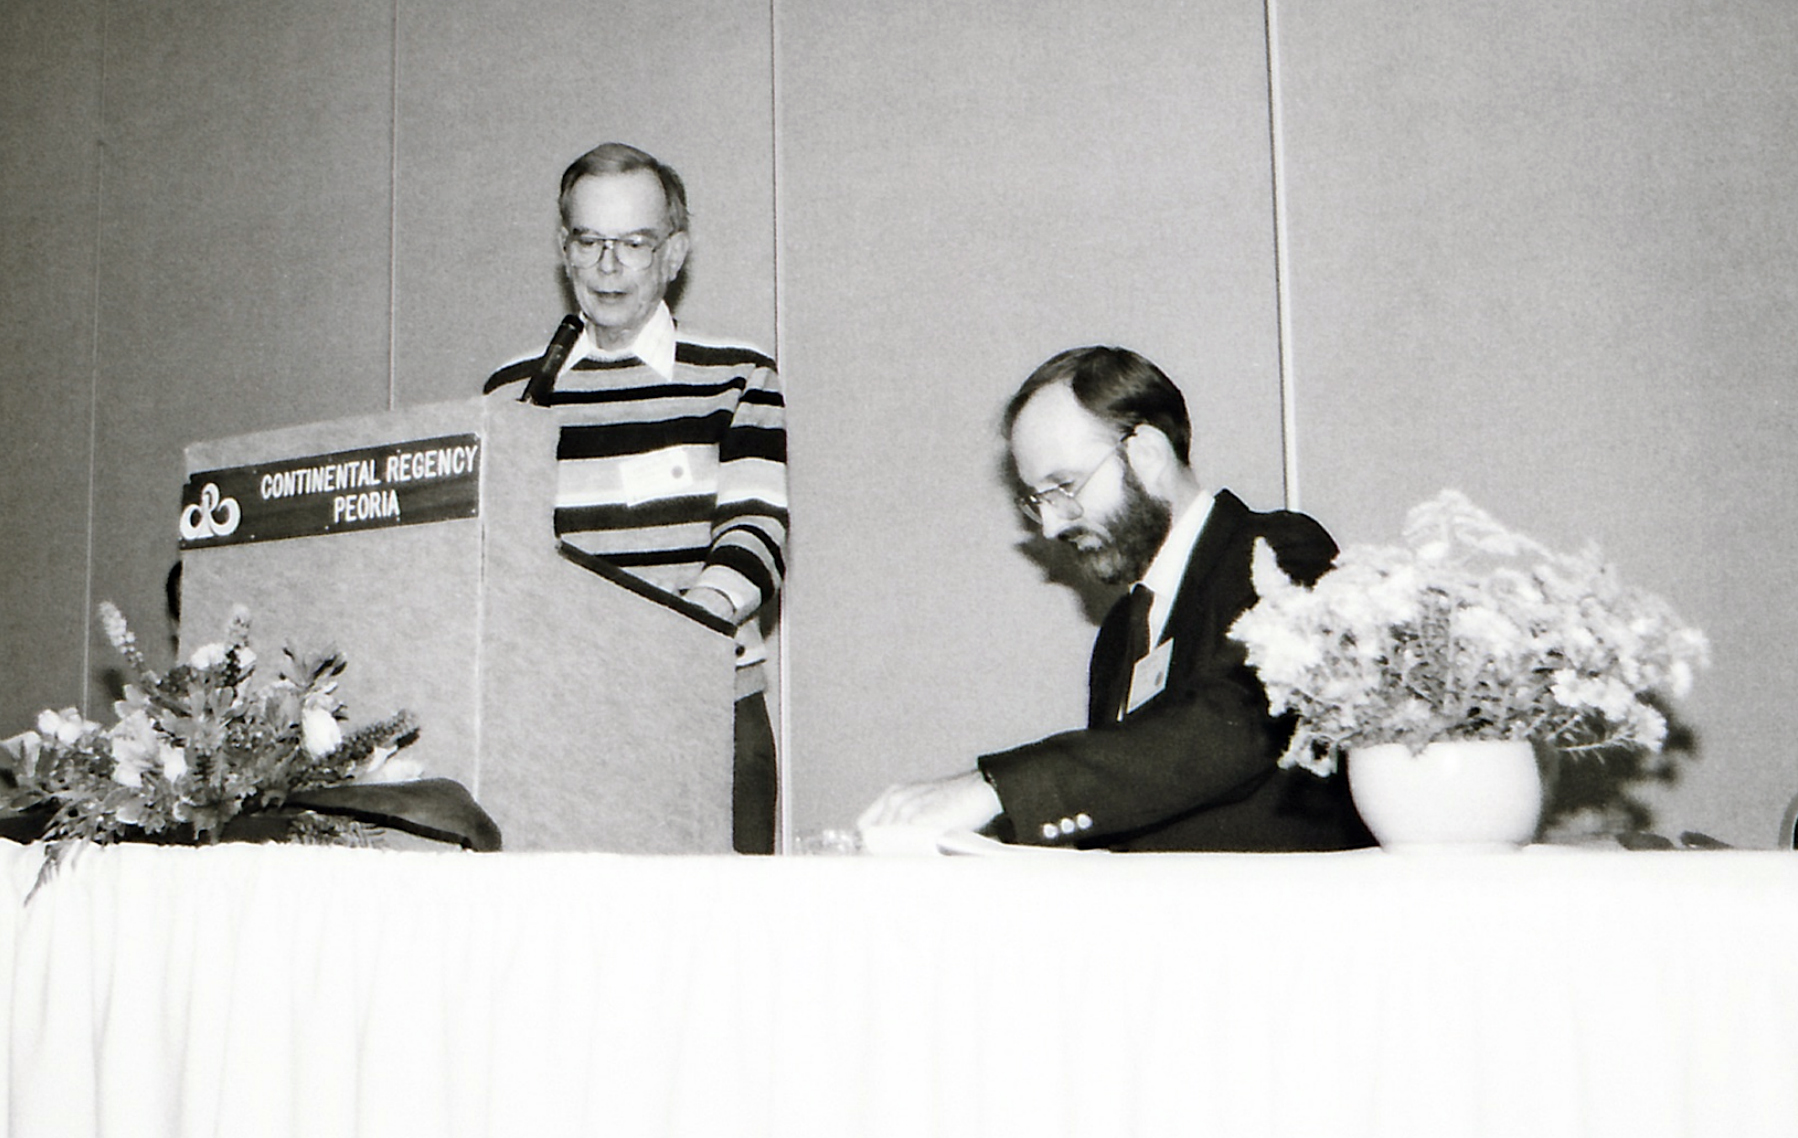 In this black and white picture, a man stands at a podium while another sits looking at material on a nearby table 